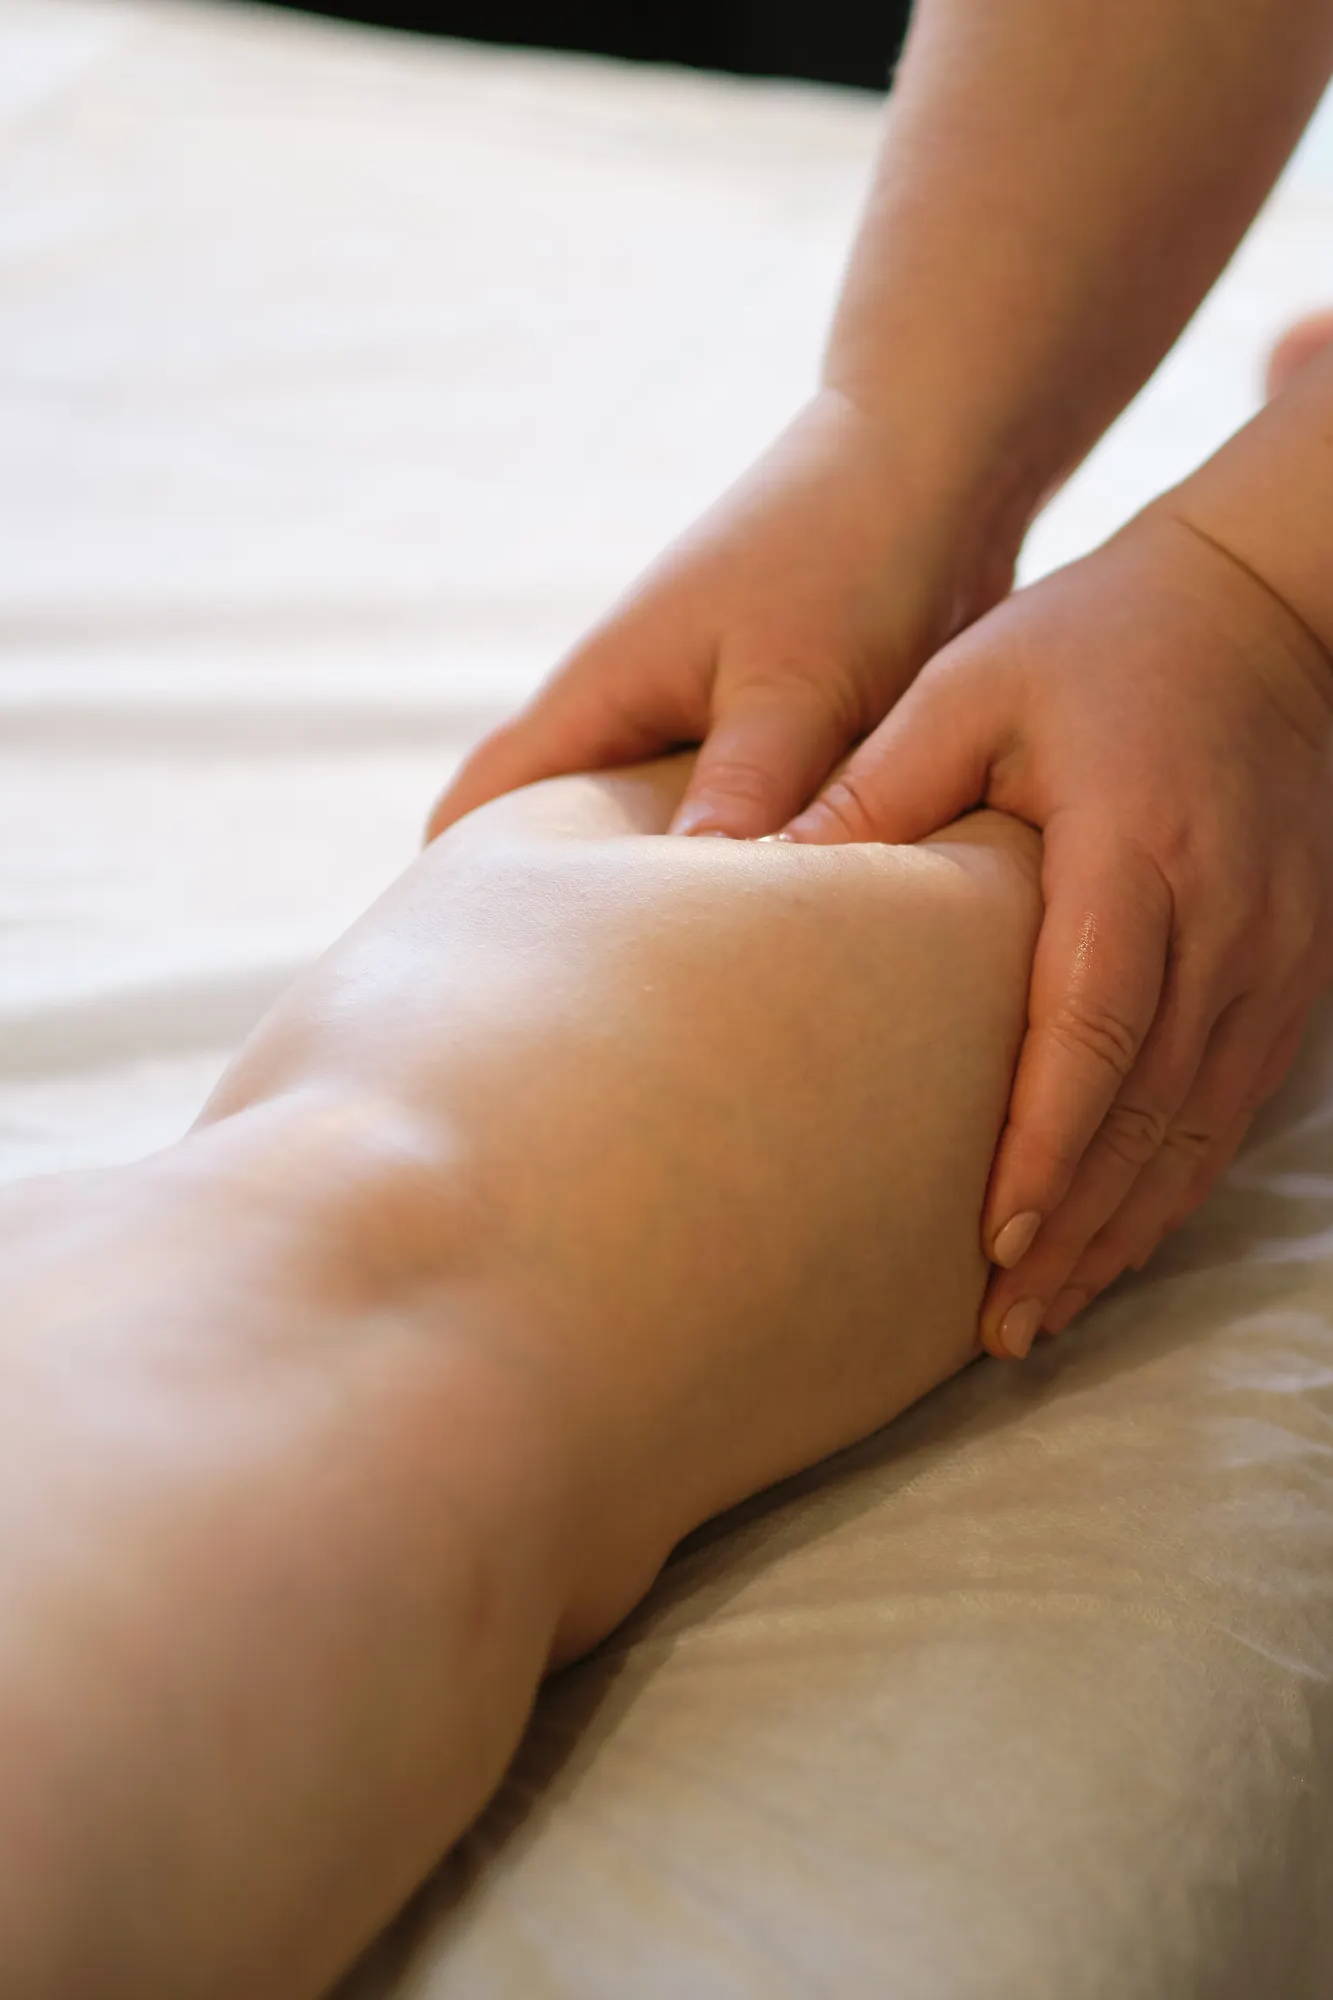 Practitioner helping relieve swelling for lymphedema patient